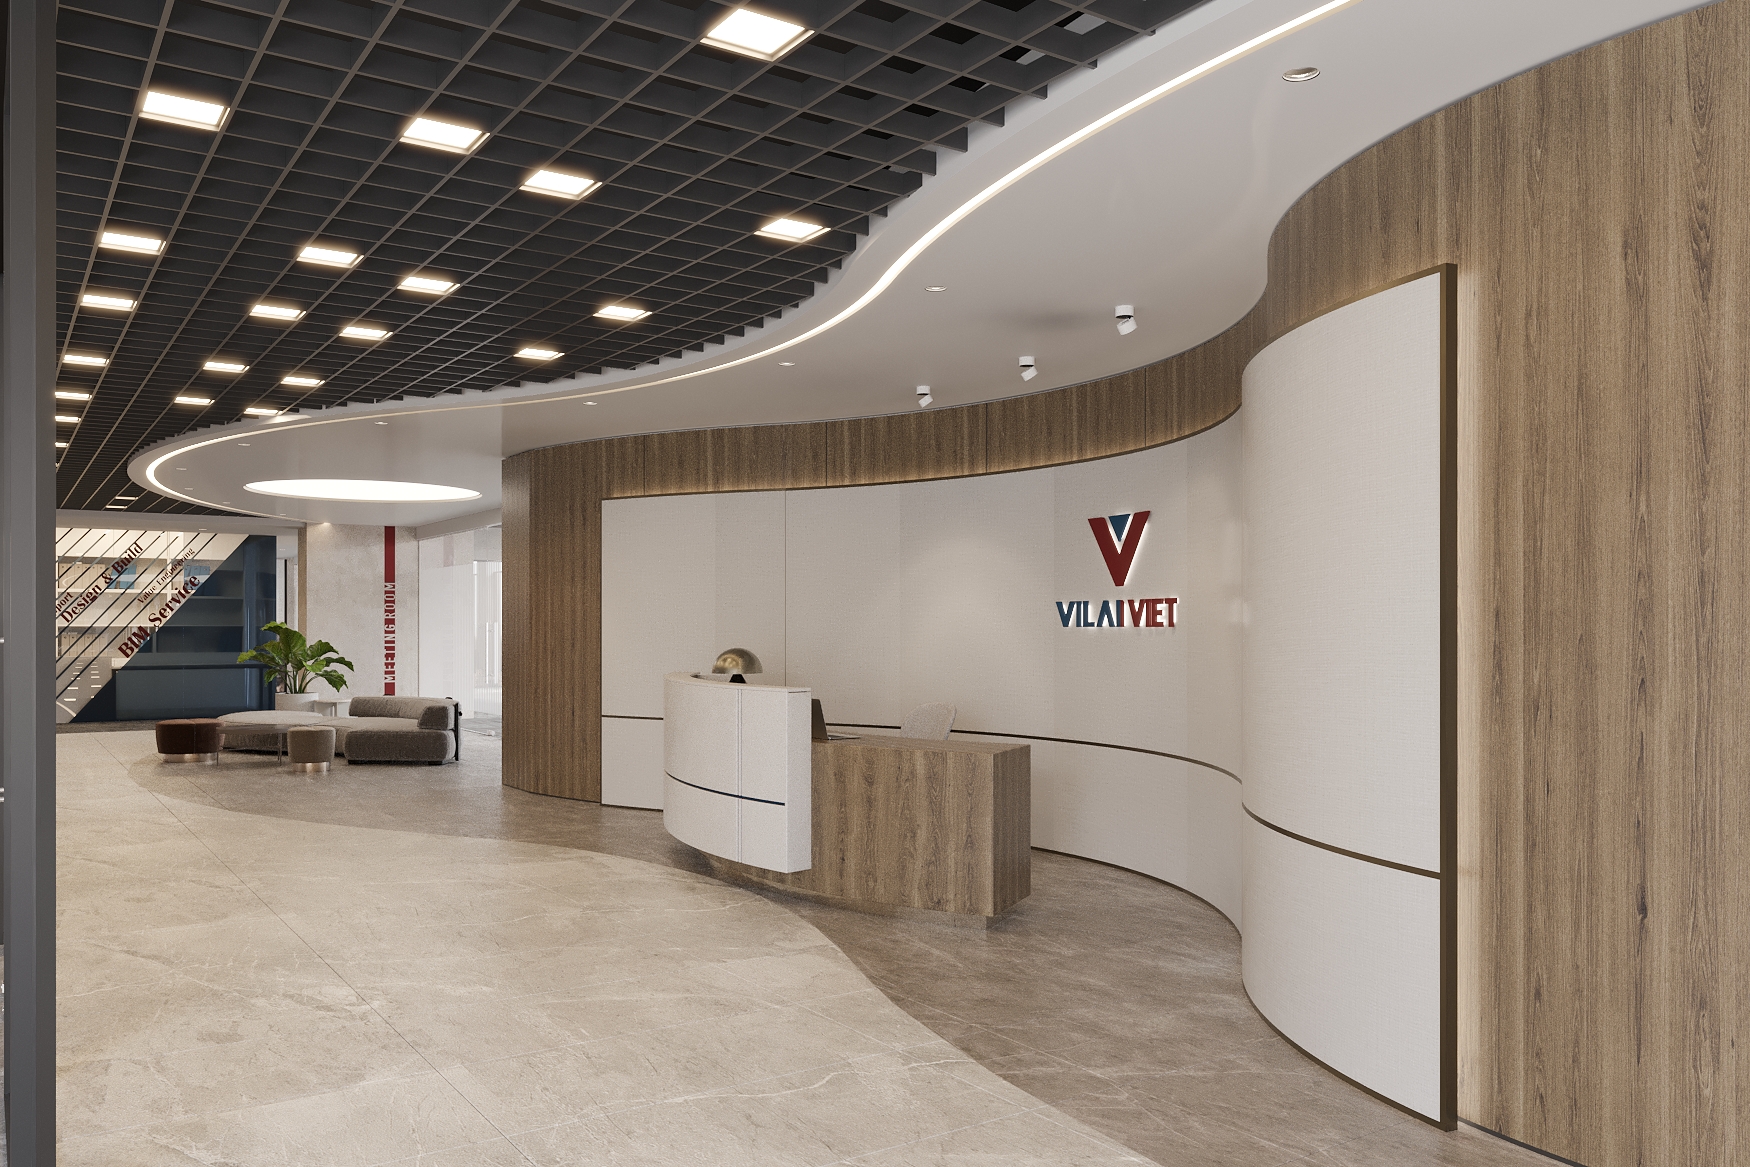 Vilai Viet moved into a more modern office after 11 years of operation